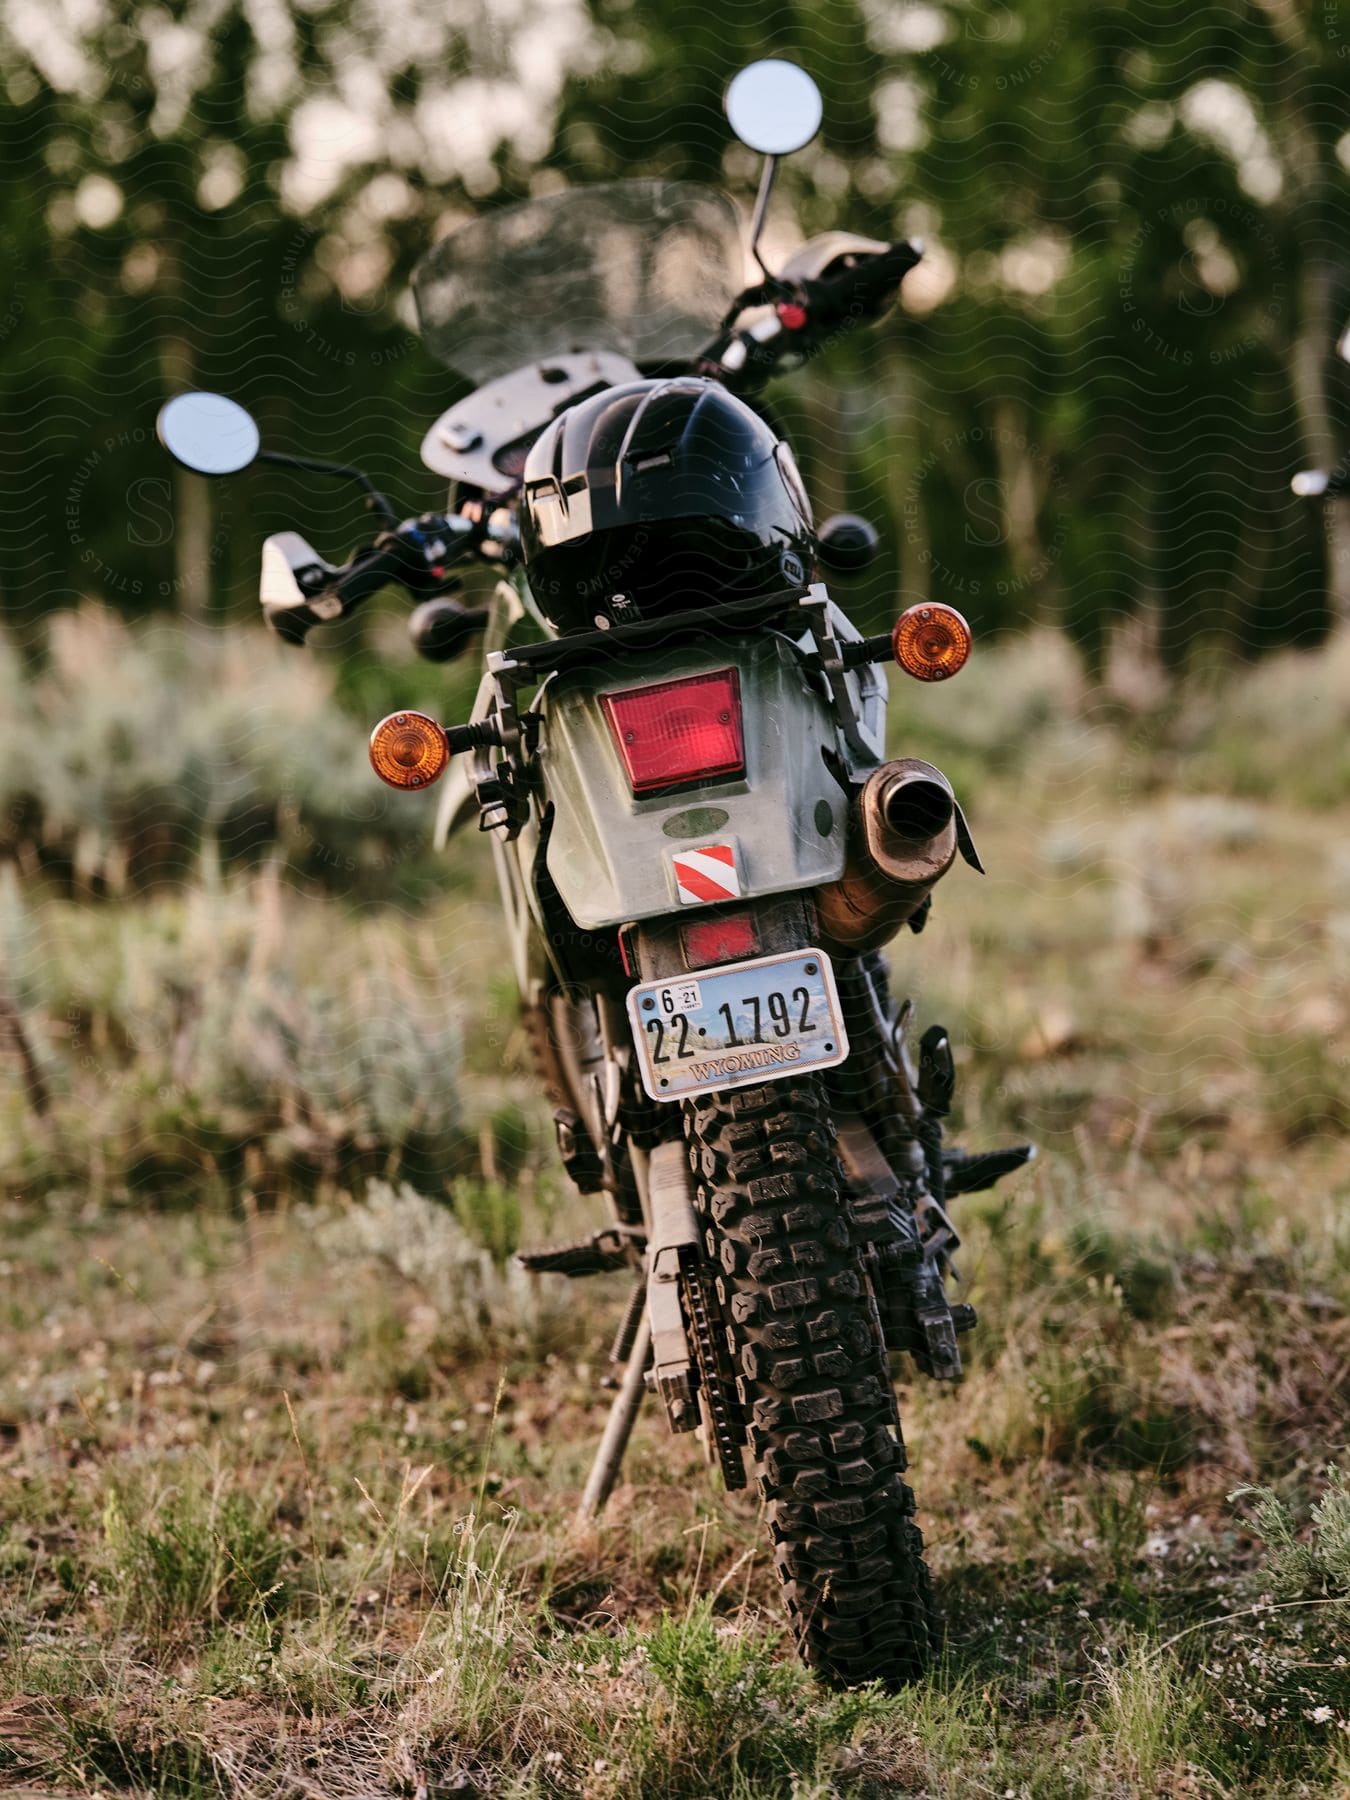 A black dirt bike with a Wyoming license plate, topped with a black helmet, parked in a field with trees in the background blurred.